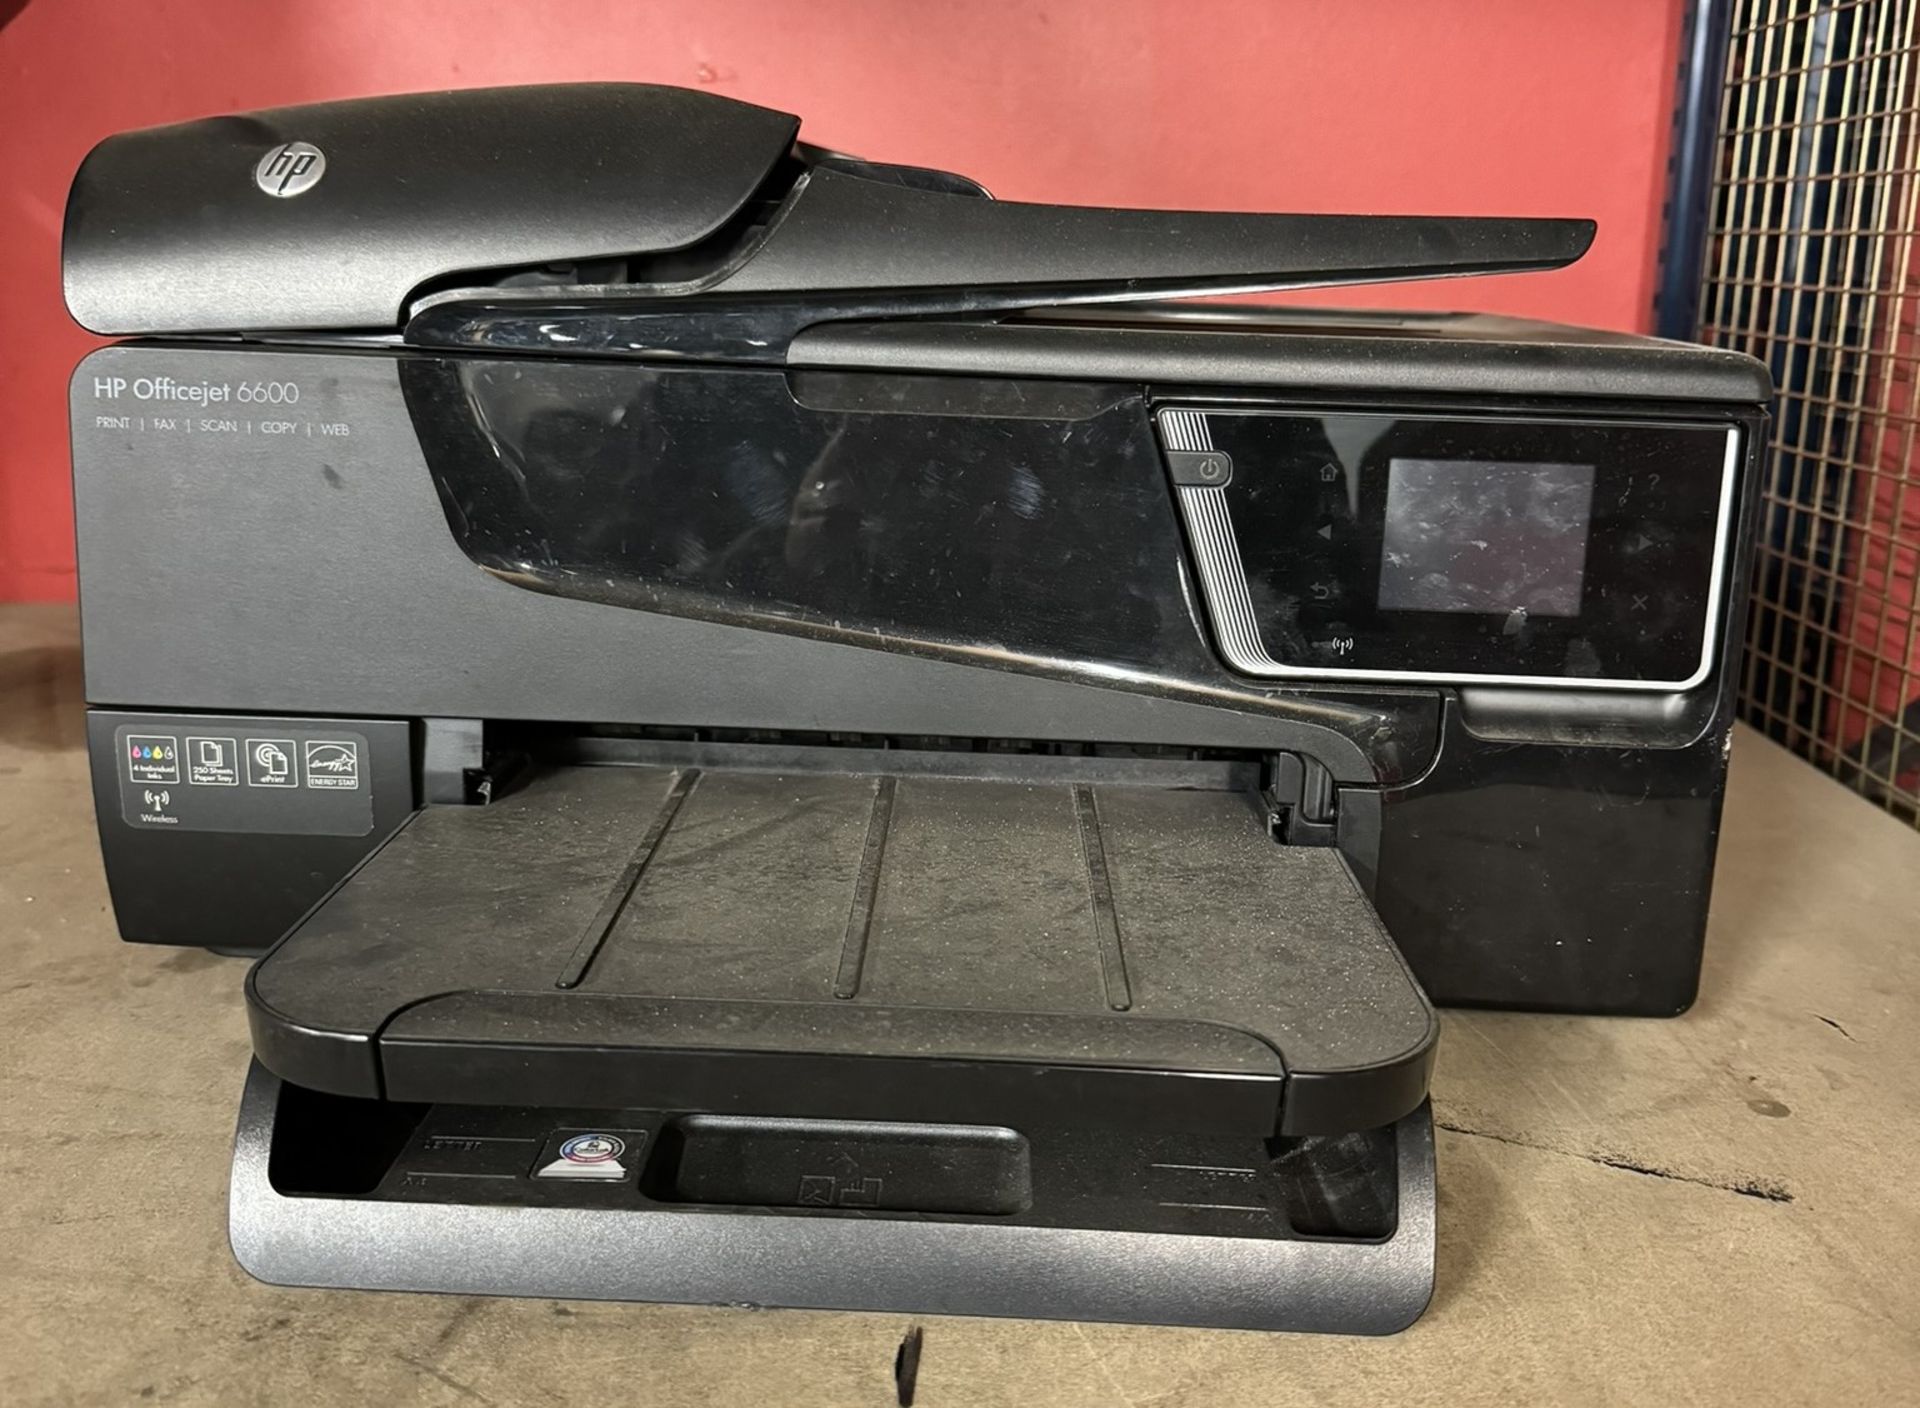 HP Officejet 6600 All In One Colour Printer